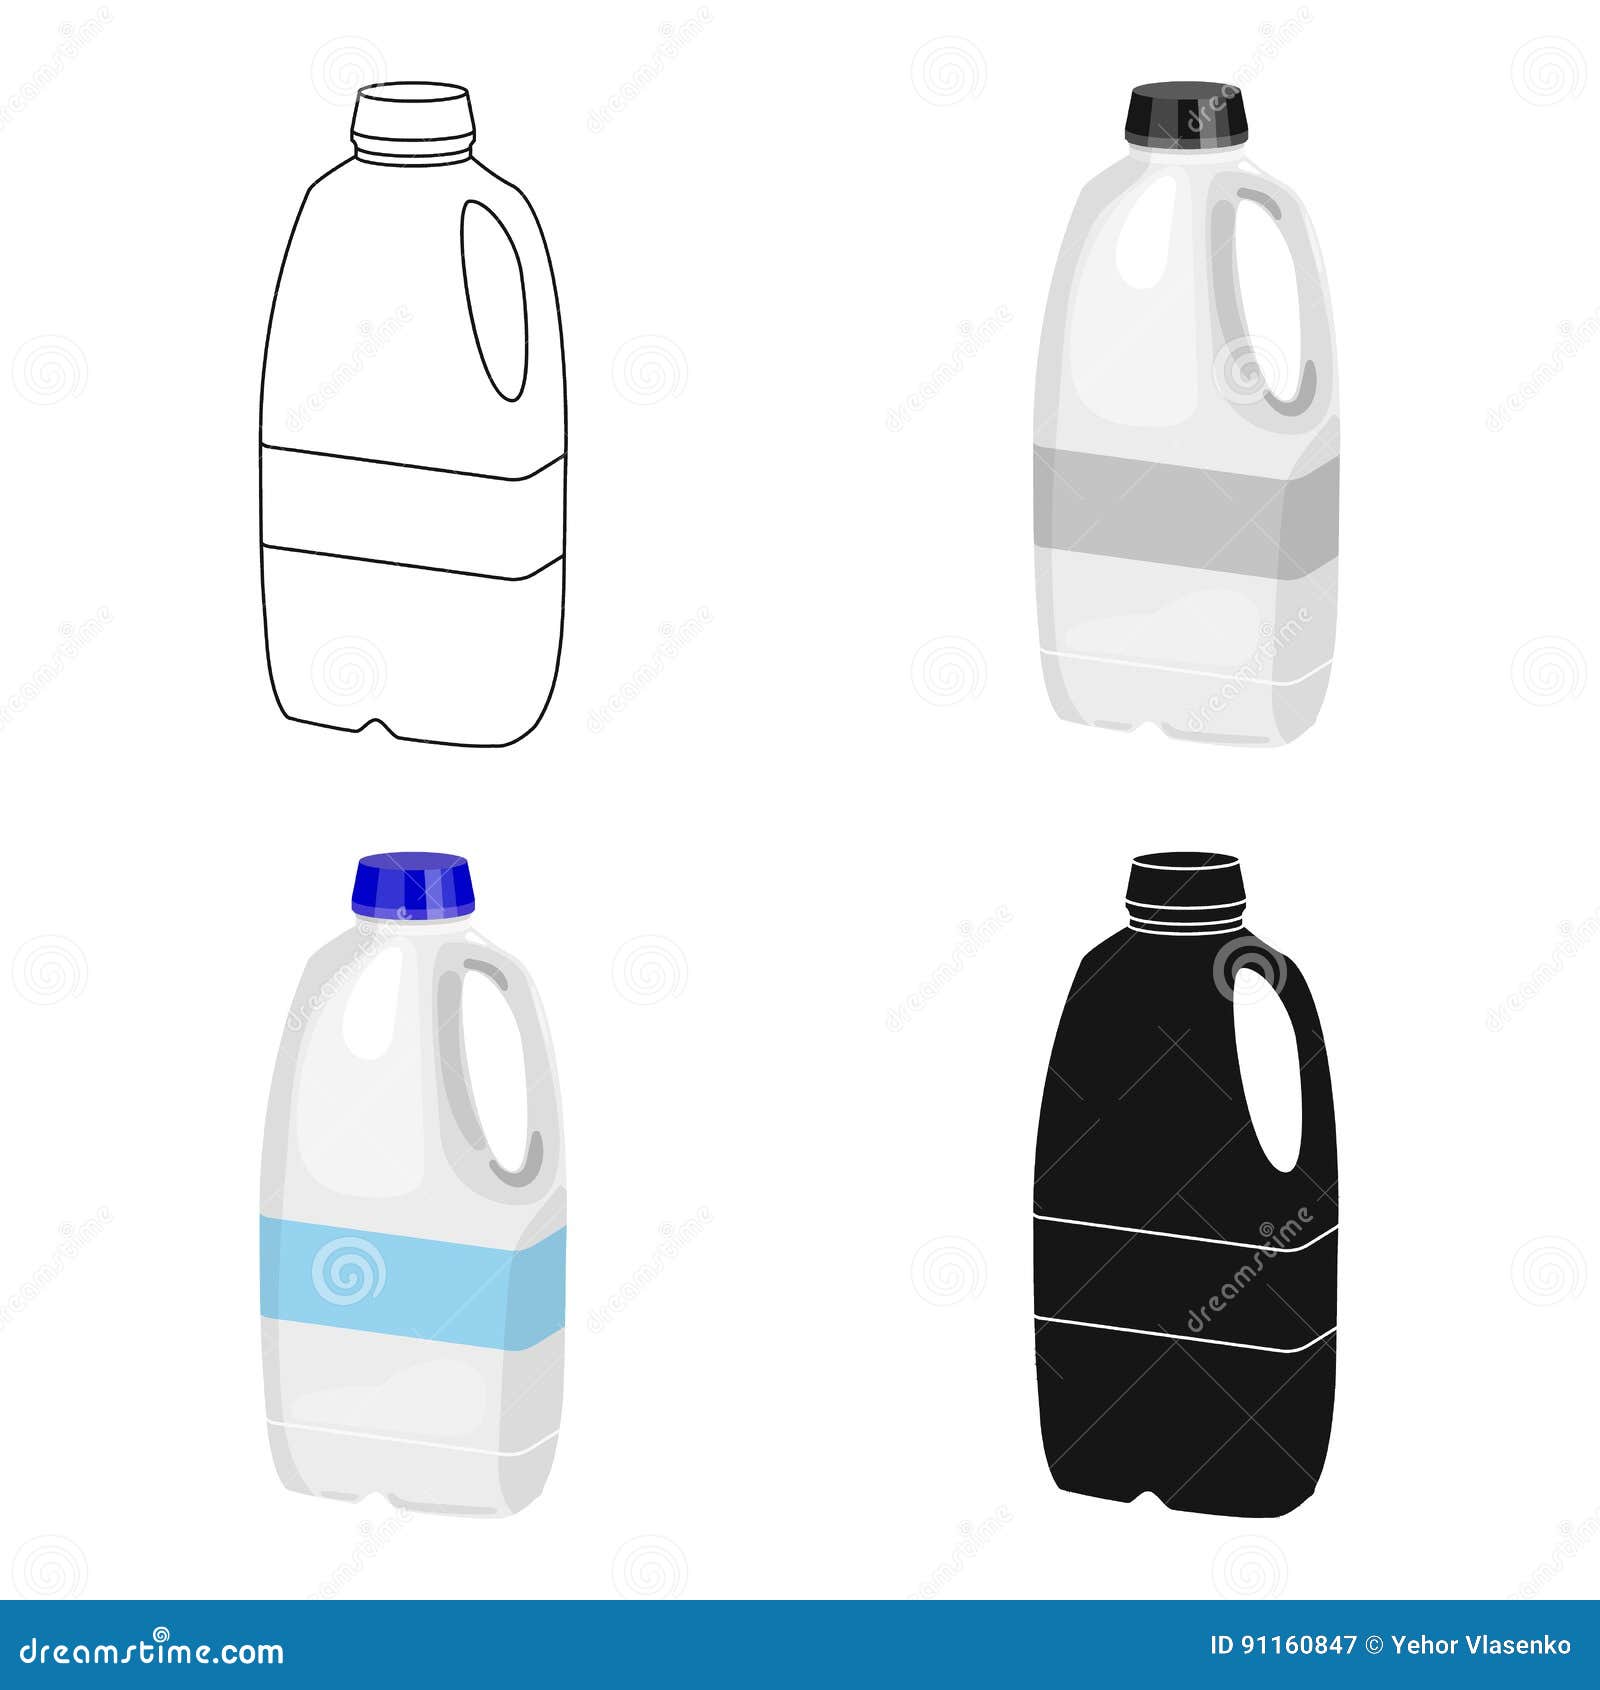 https://thumbs.dreamstime.com/z/gallon-plastic-milk-bottle-icon-cartoon-style-isolated-white-background-milk-product-sweet-symbol-stock-vector-91160847.jpg